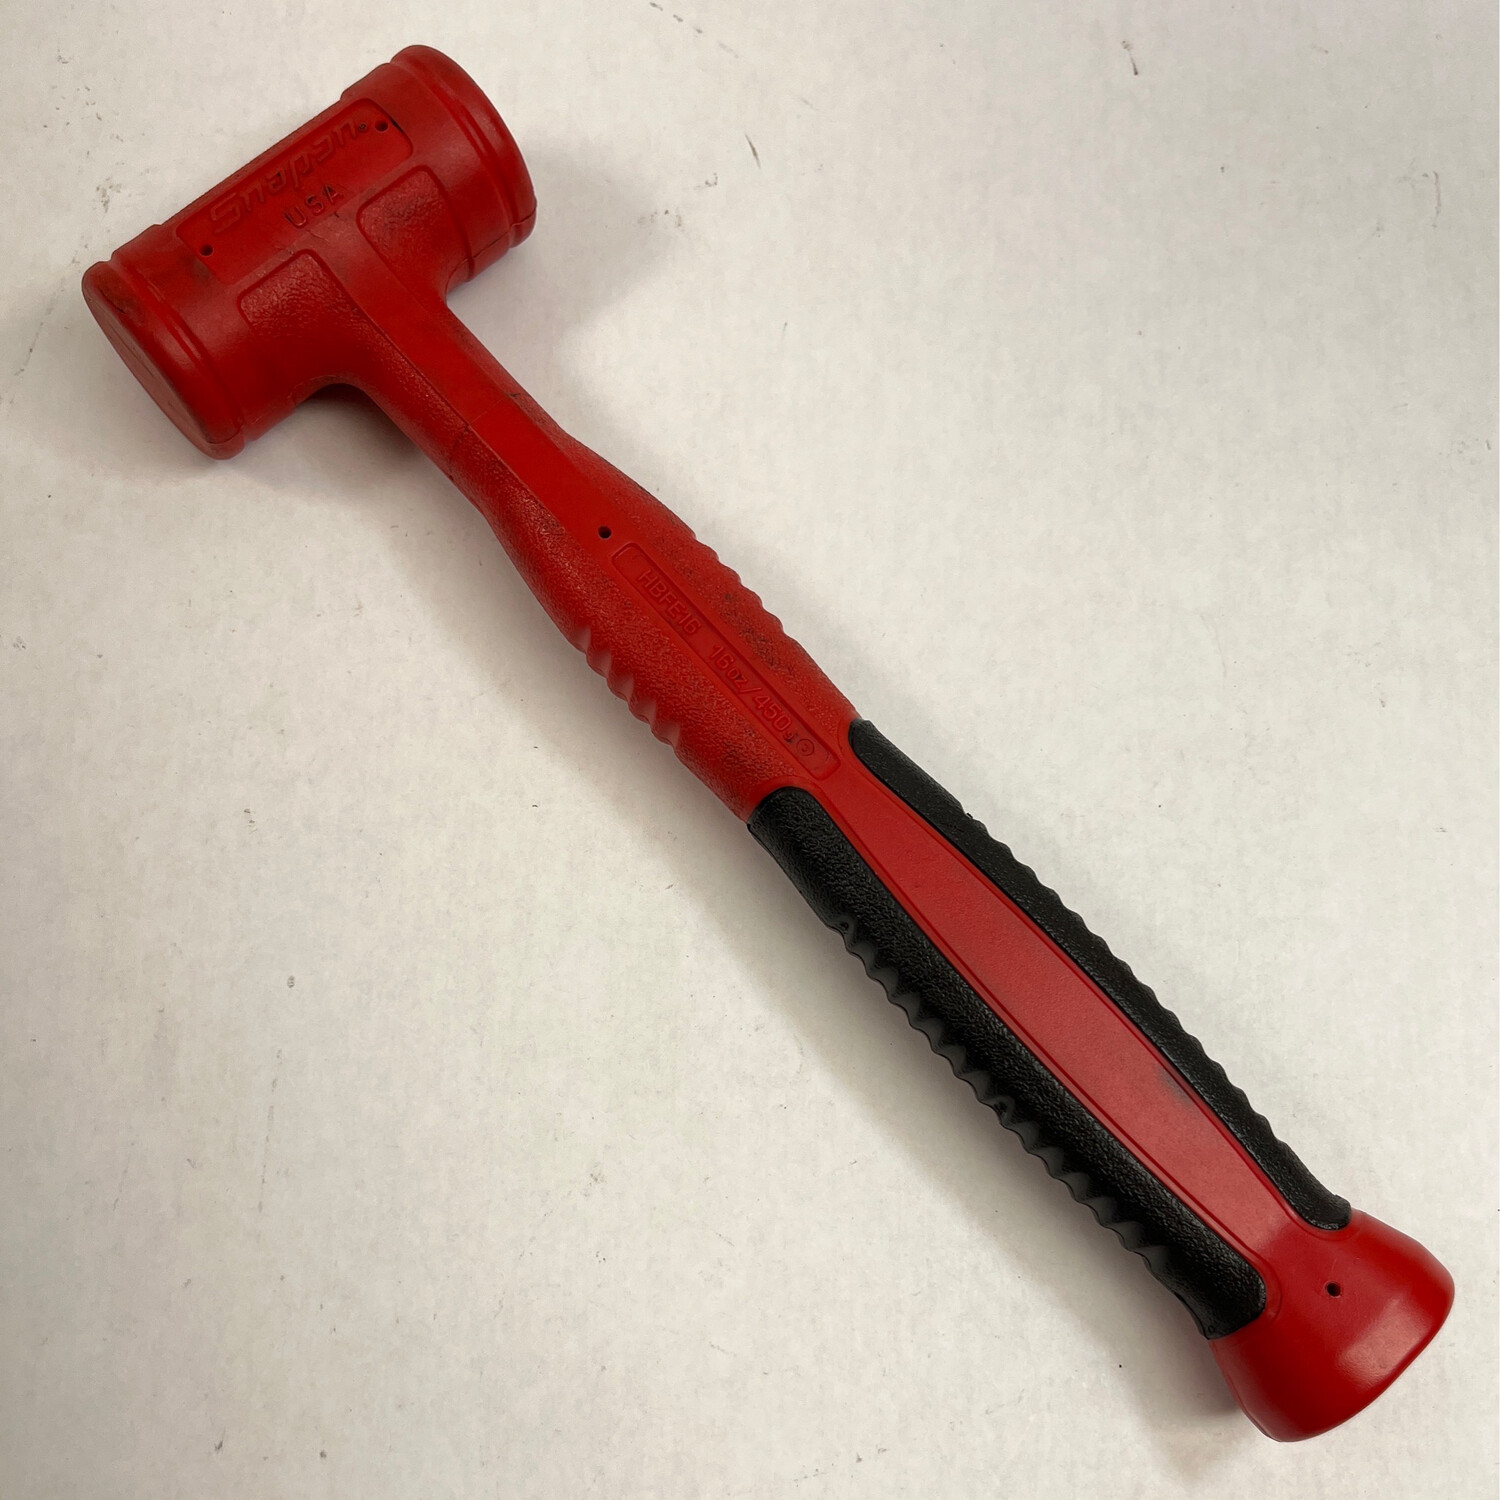 Snap On 16 oz Soft Grip Dead Blow Hammer, HBFE16